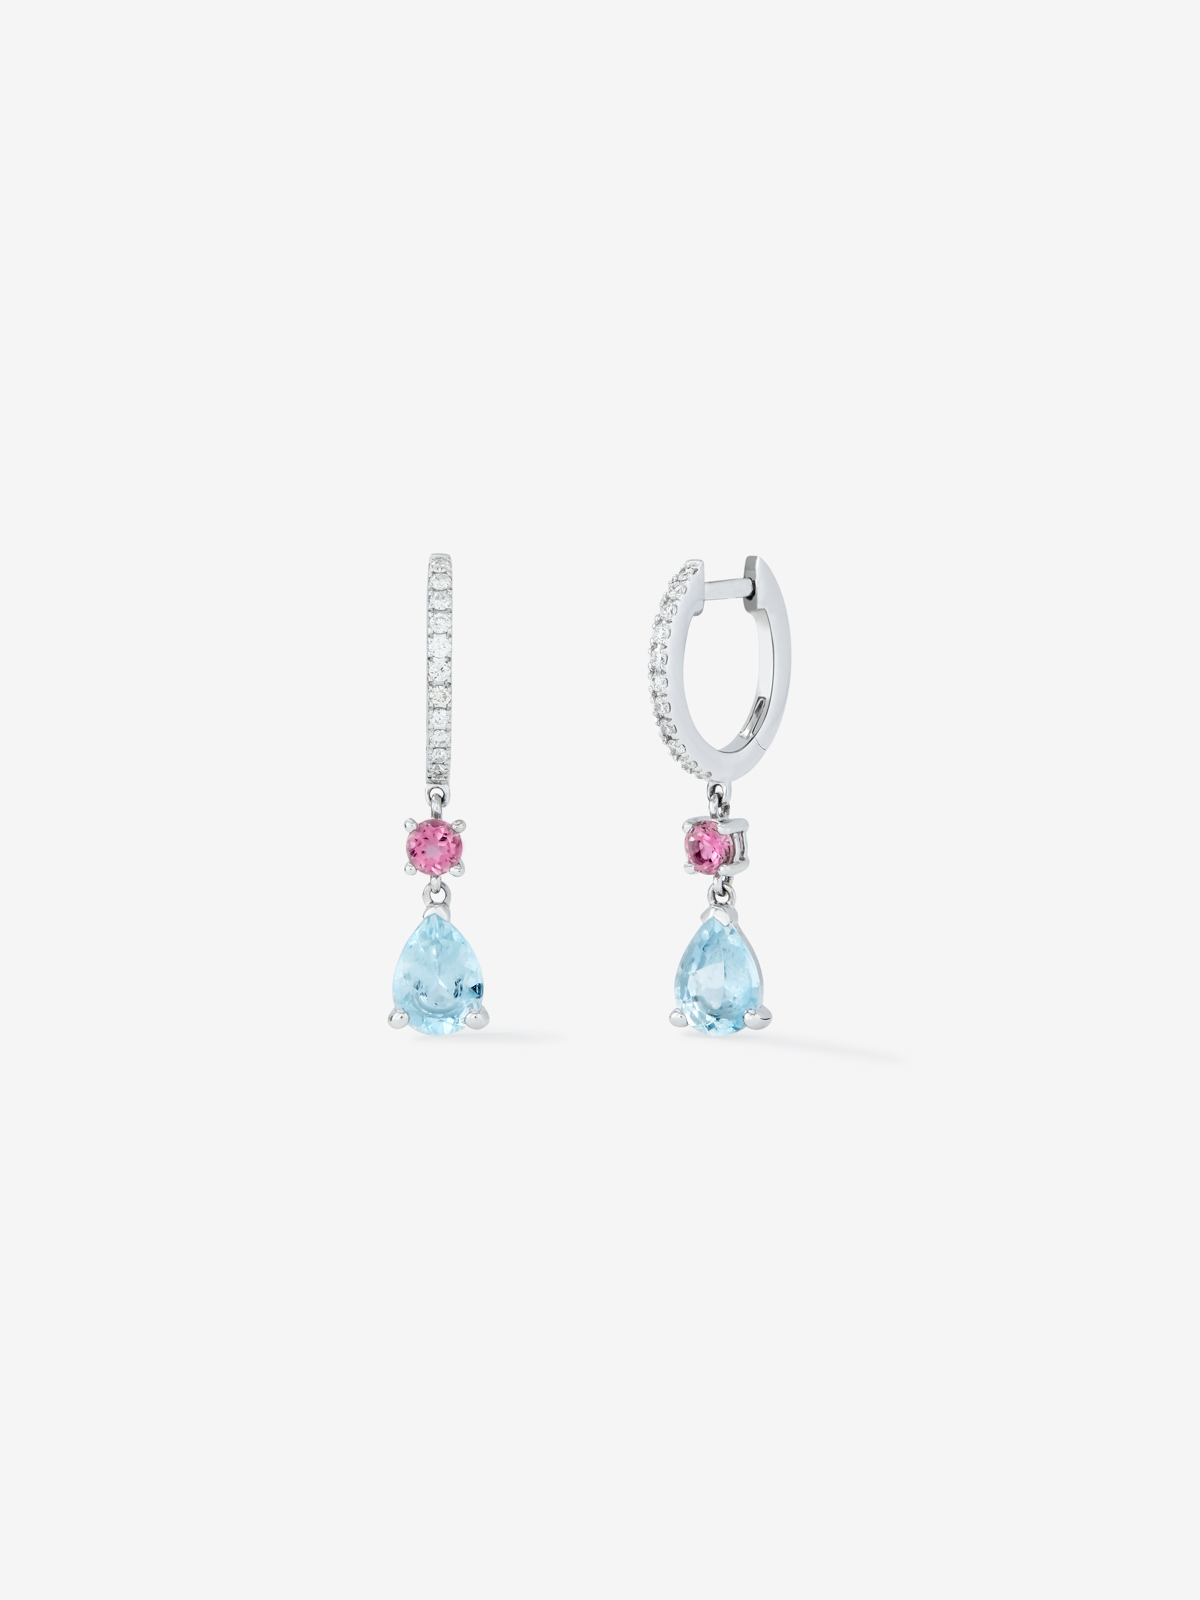 Hoop earrings with 18K white gold pendant featuring aquamarine and tourmaline.